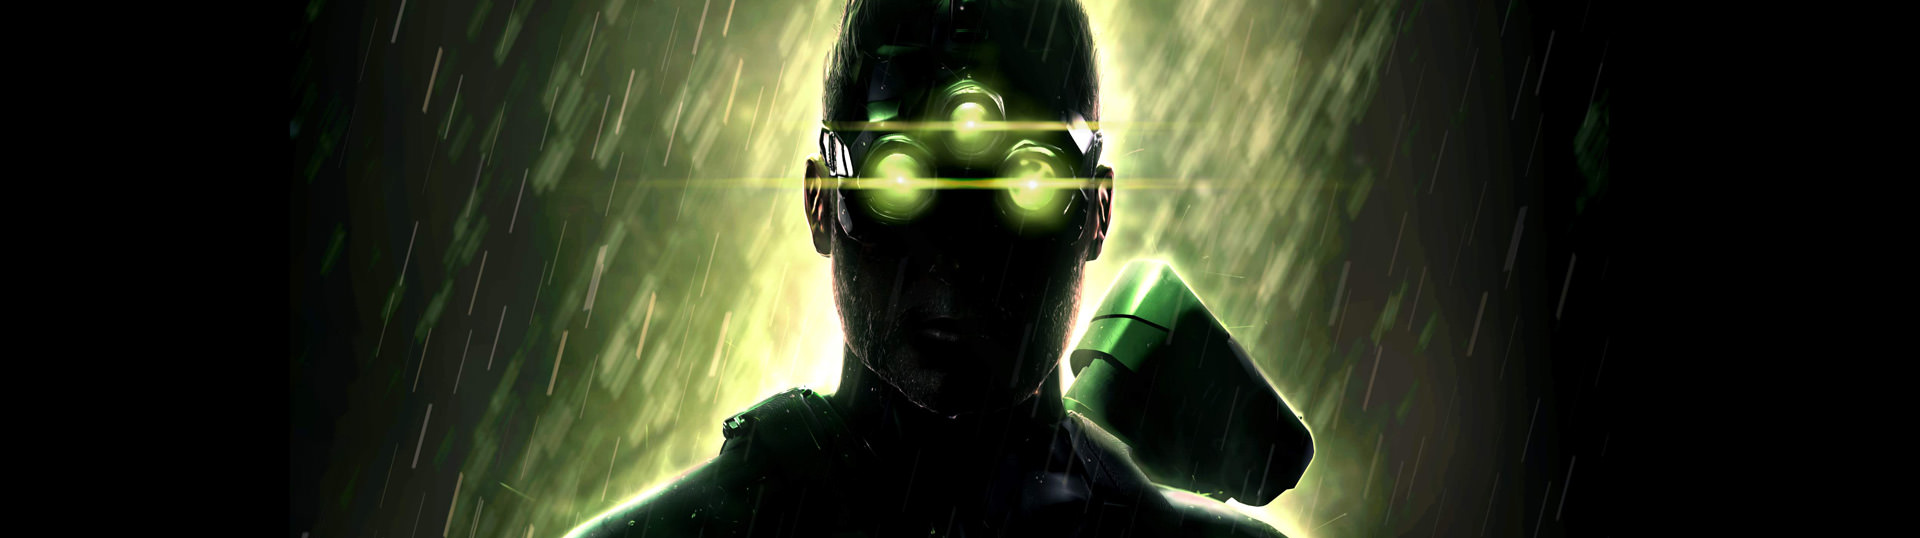 Buy Tom Clancy's Splinter Cell Chaos Theory®